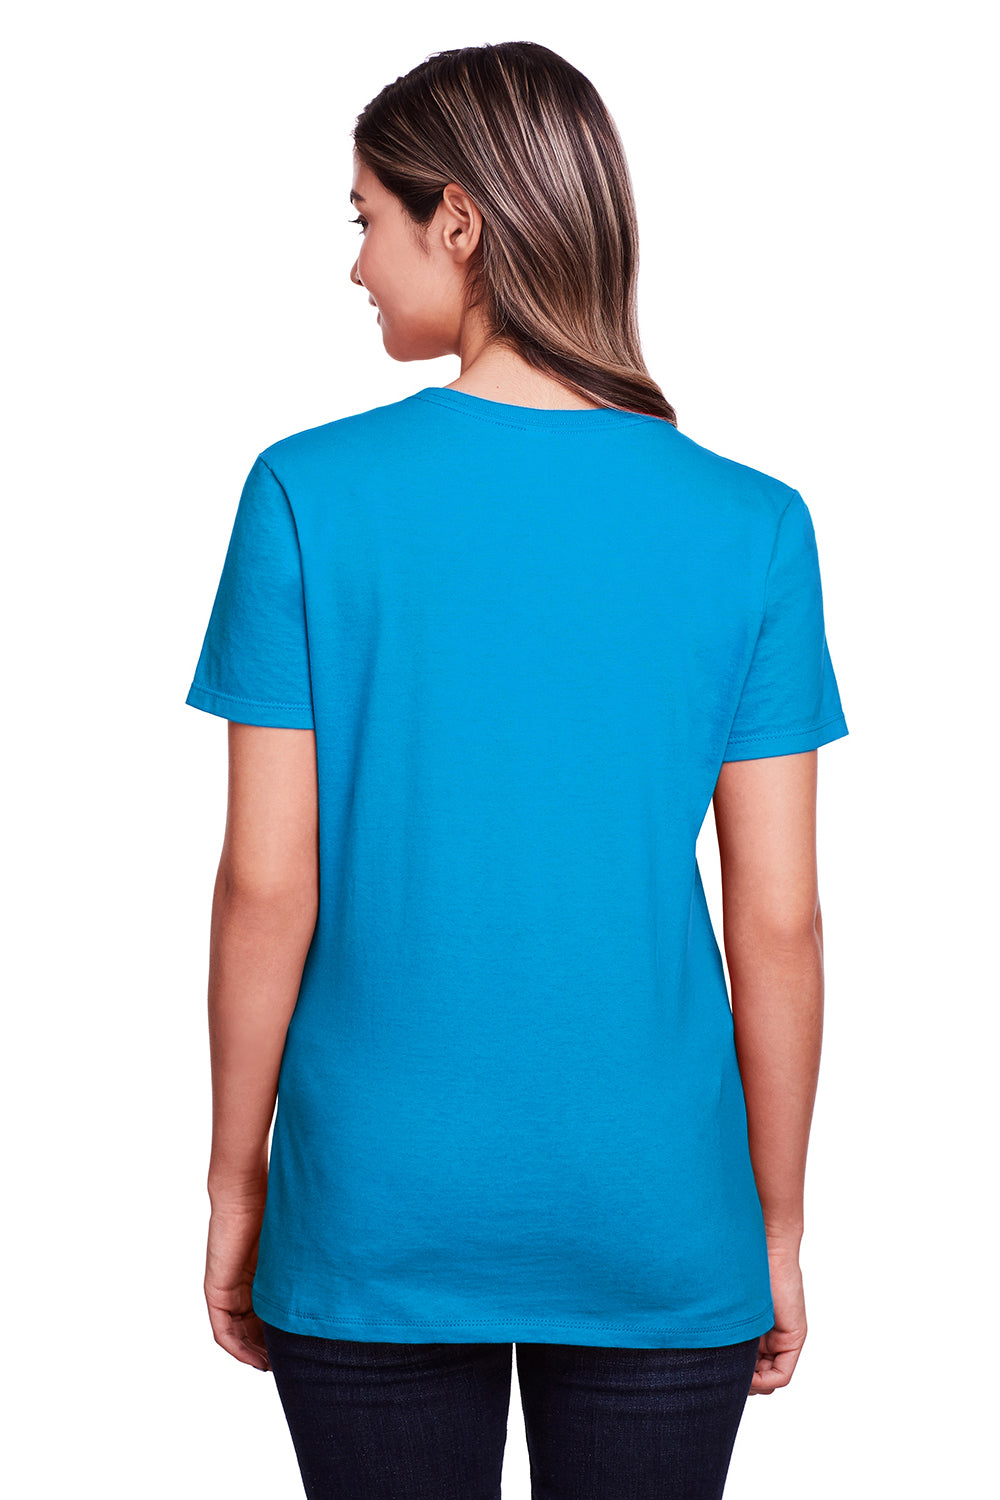 Fruit Of The Loom IC47WR Womens Iconic Short Sleeve Crewneck T-Shirt Pacific Blue Back